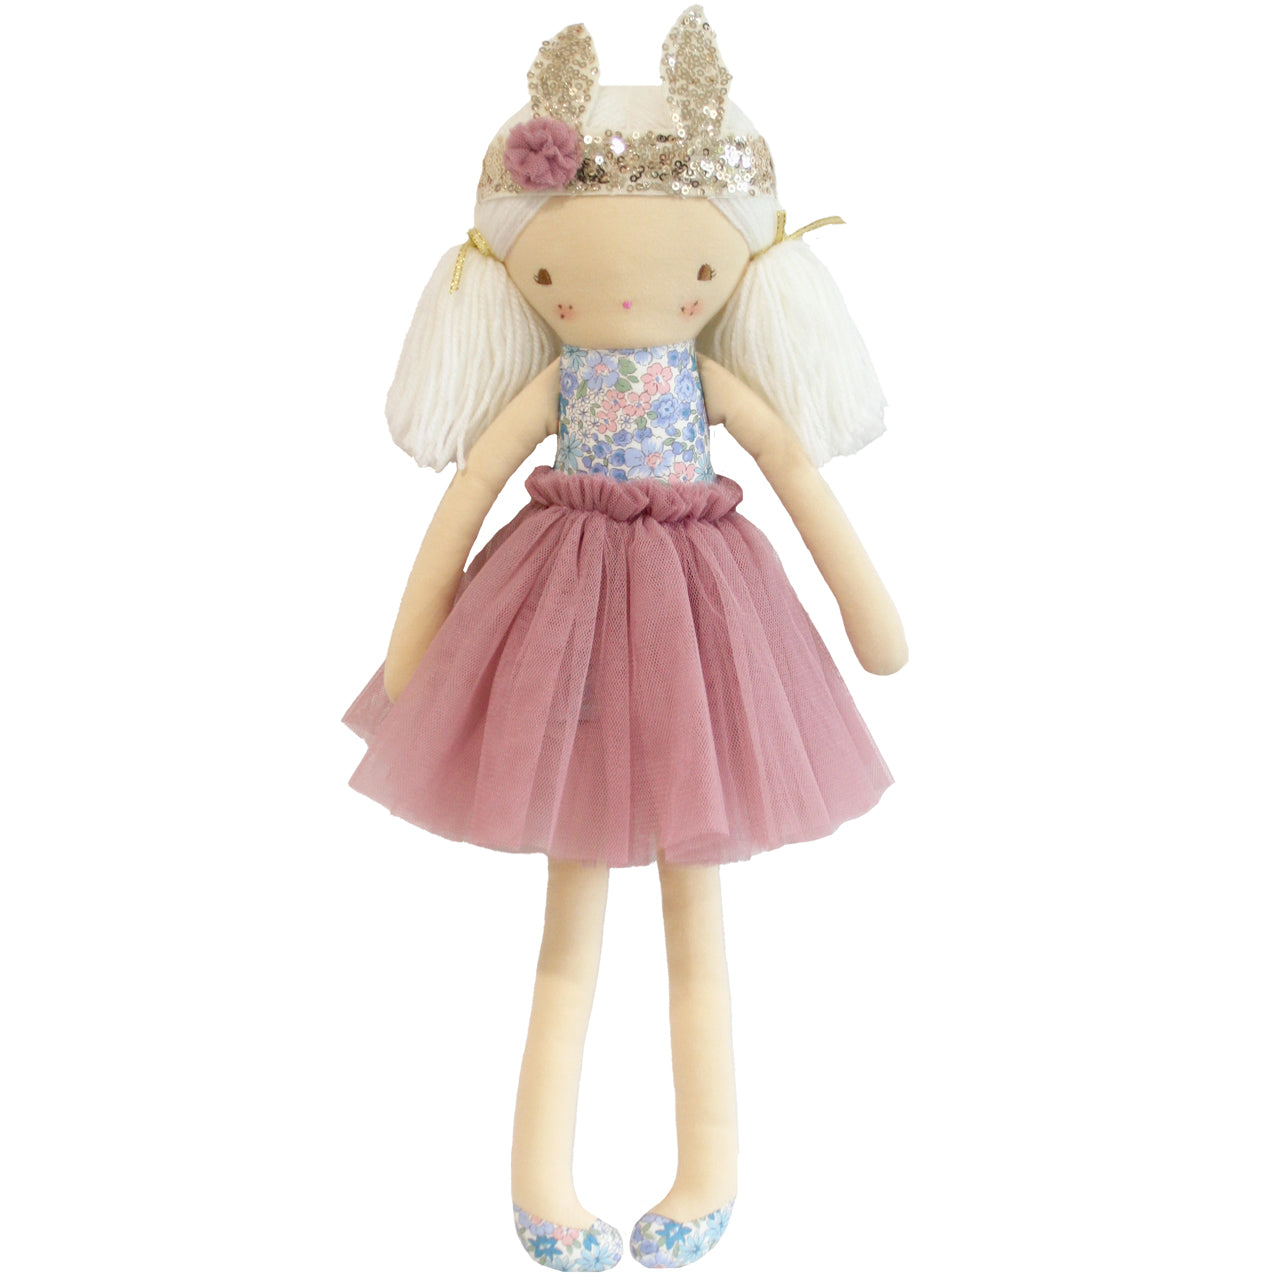 Sienna is a cute 50cm doll with cute yarn piggy tails and a sequin bunny crown.  Her tulle tutu is removable, making playtime dressups extra fun! Suitable from 3yrs. 